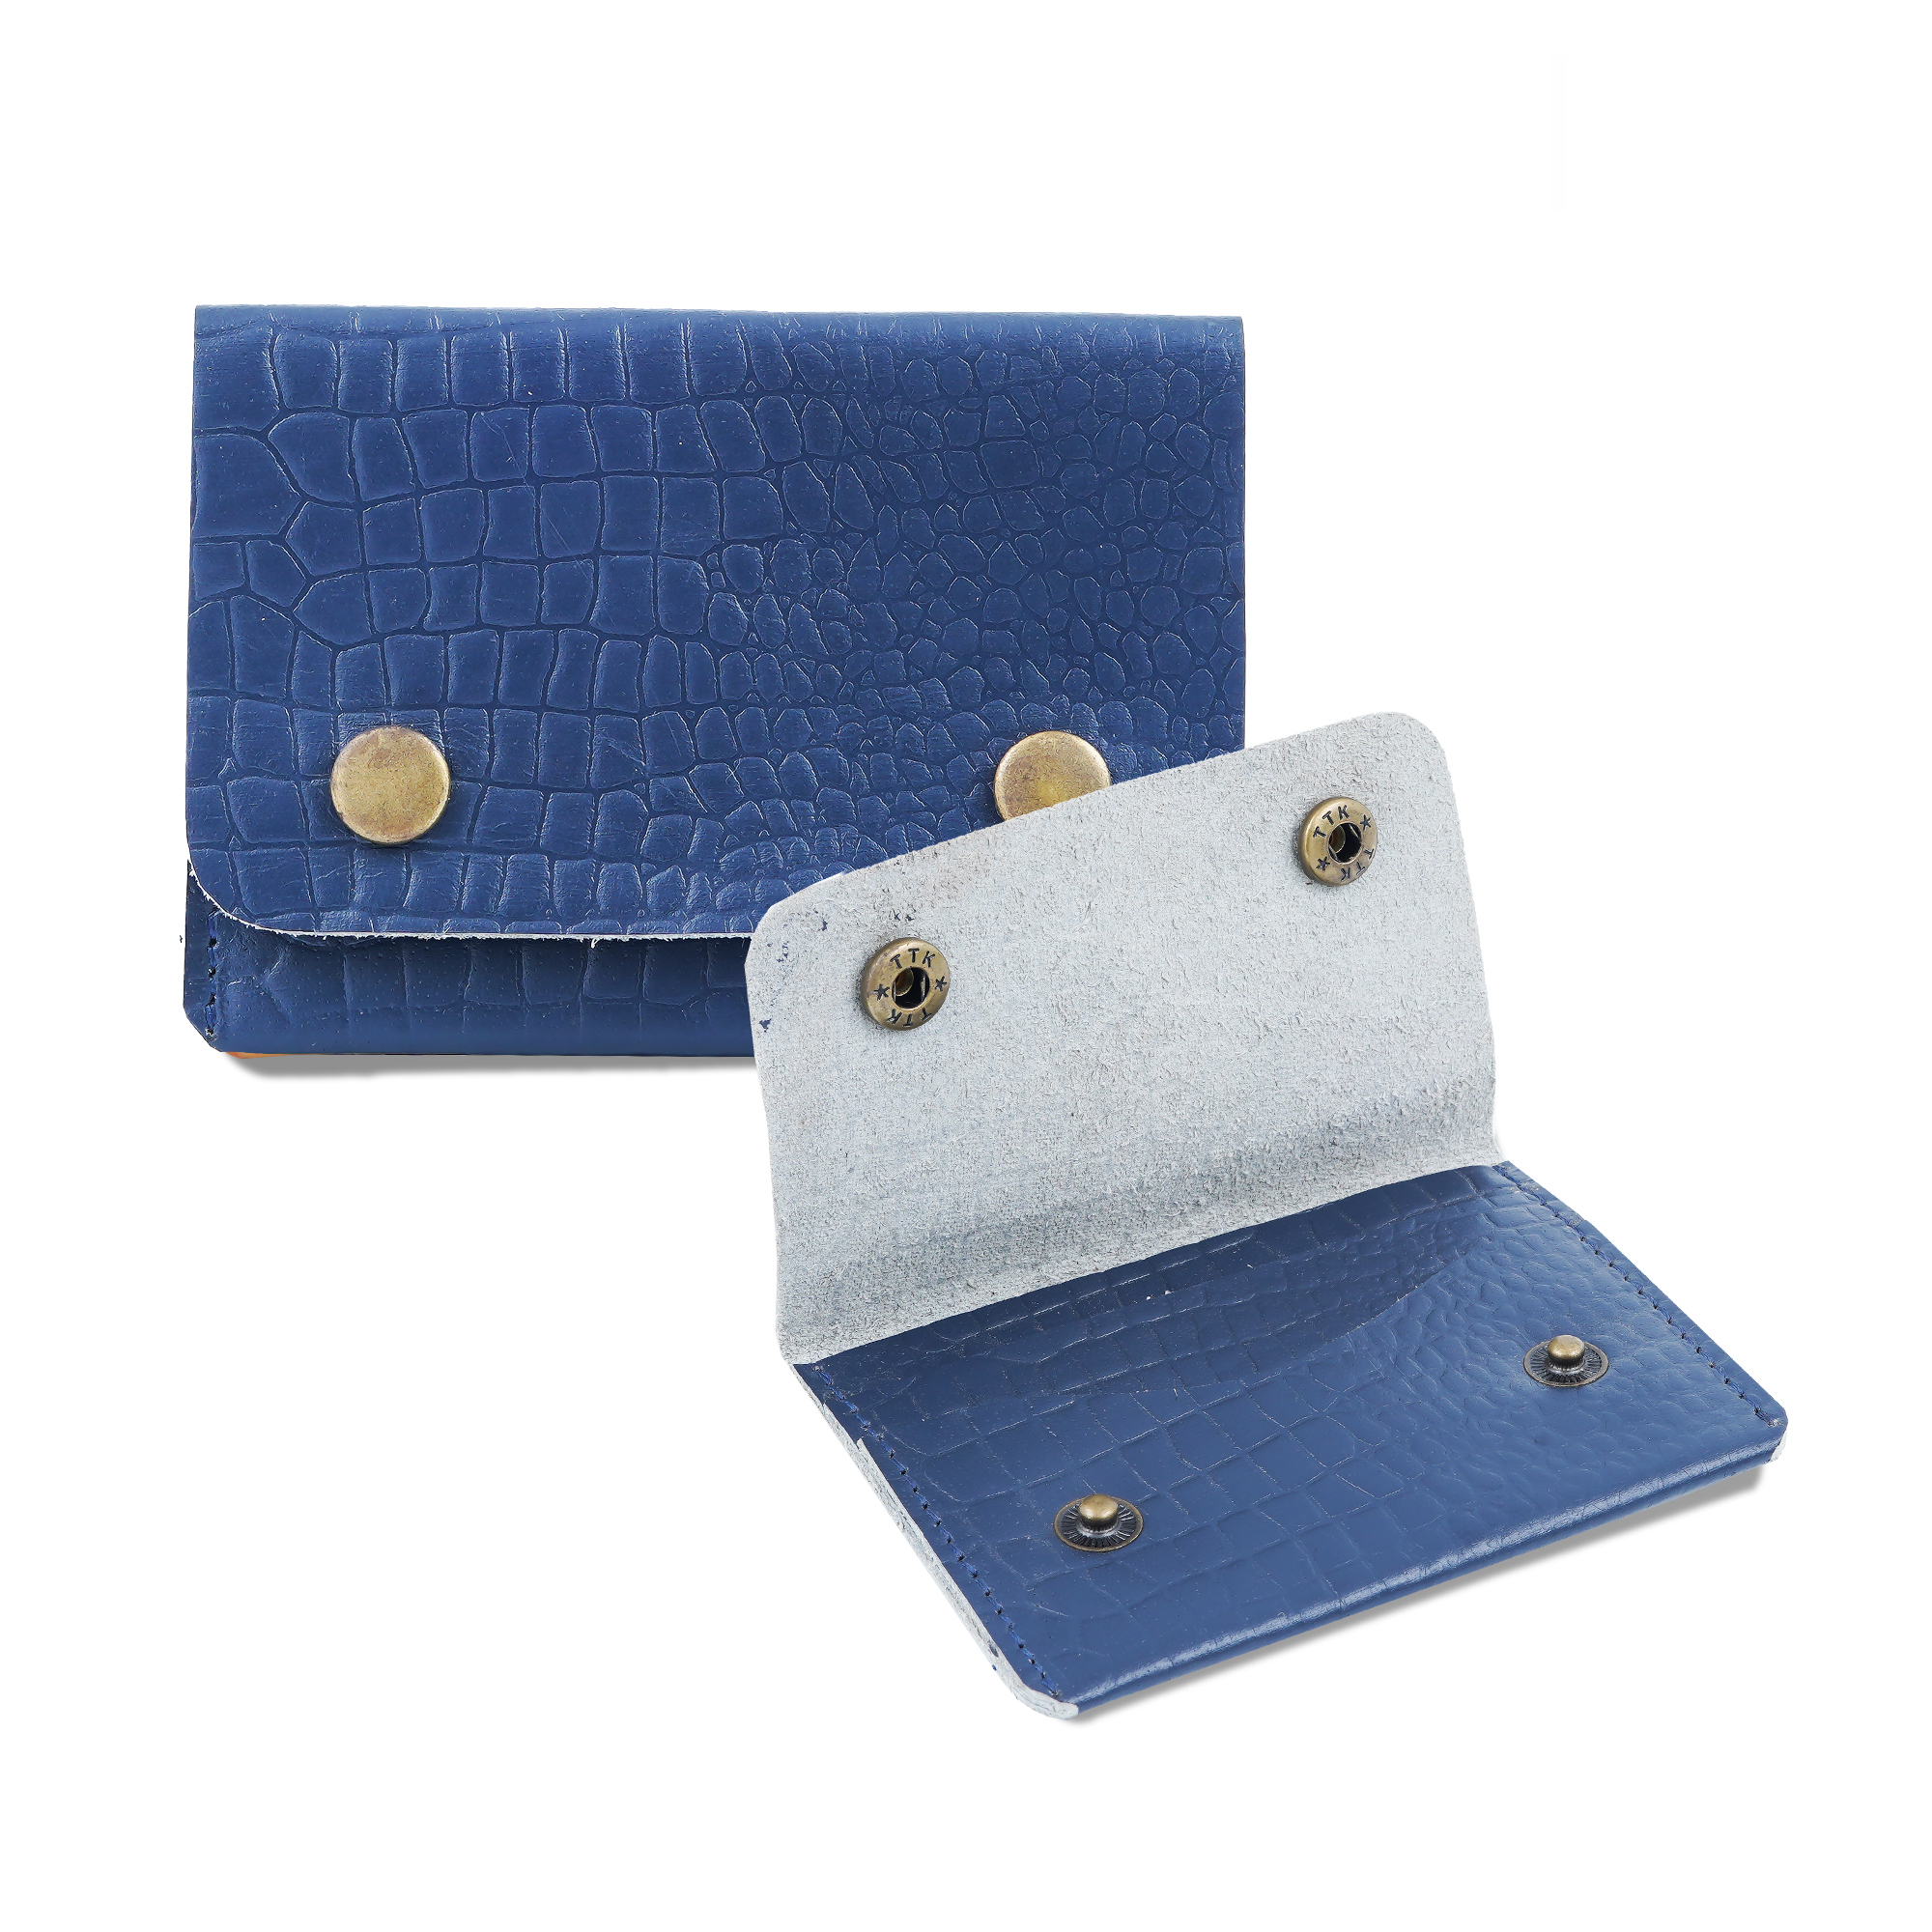 Leather Riveted Wallet for Men and Women | Blue Croco-asset-338